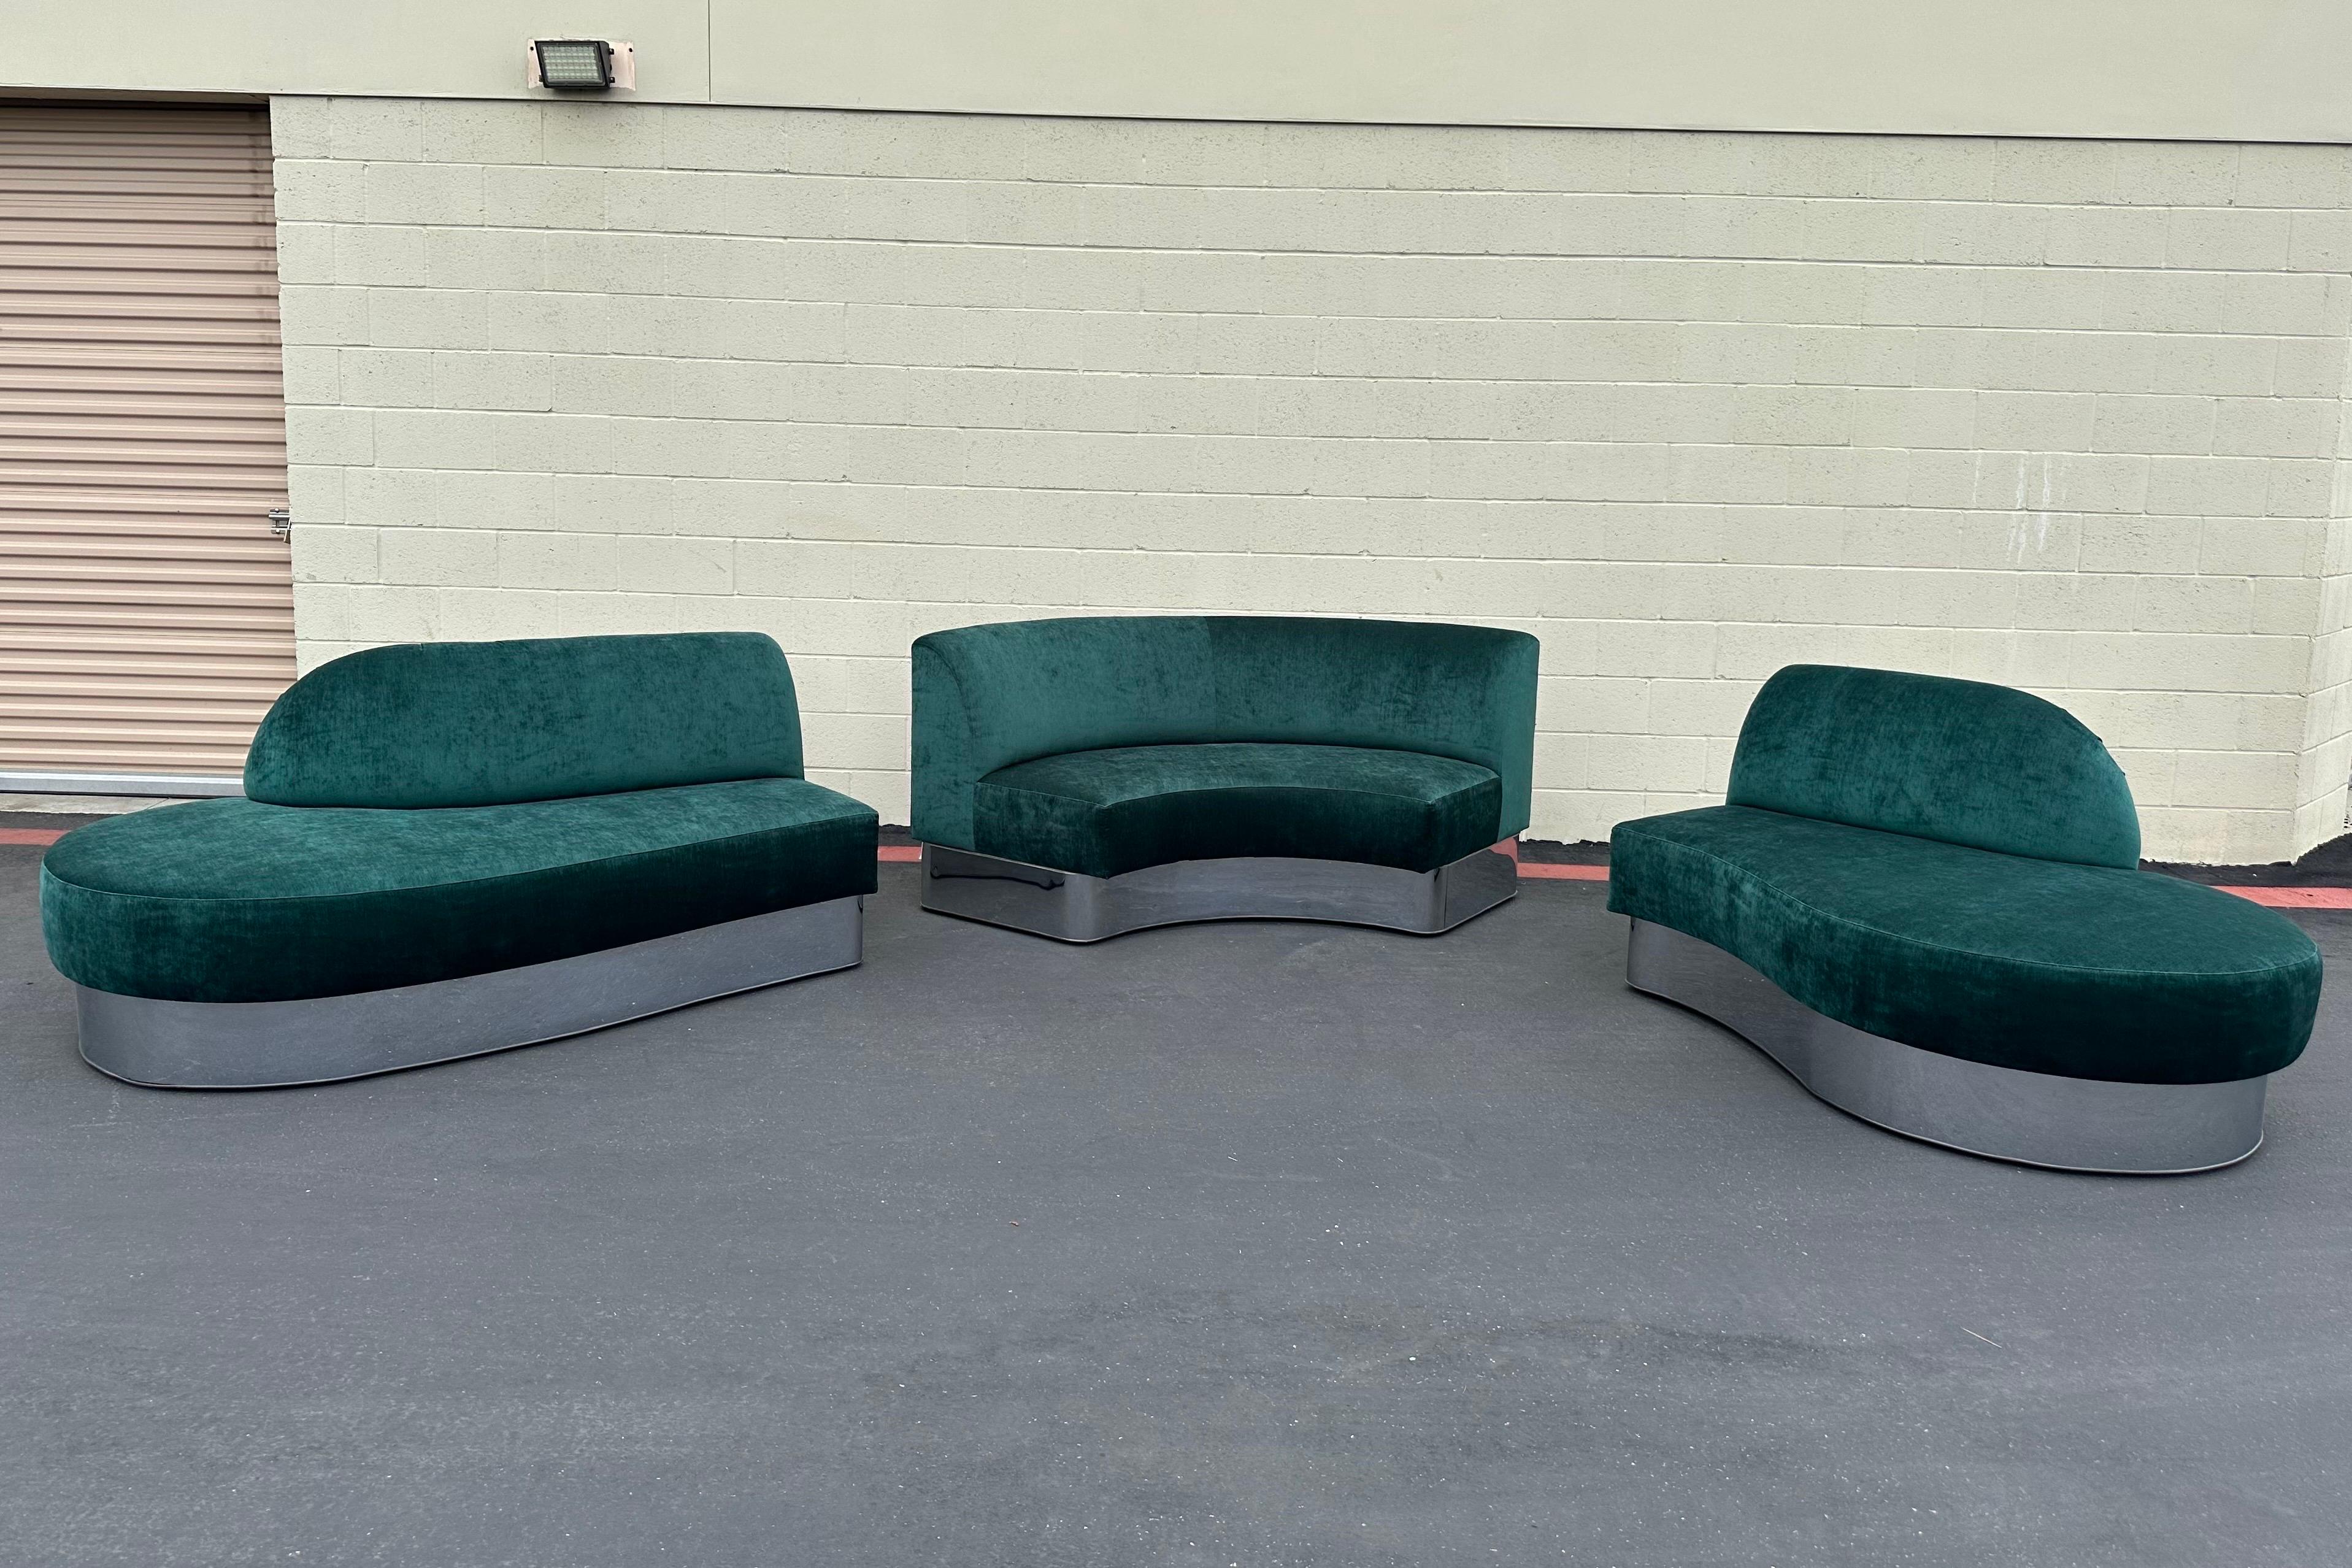 Vintage Milo Baughman Serpentine Three Pieces Sectional Sofa for Thayer Coggin For Sale 3